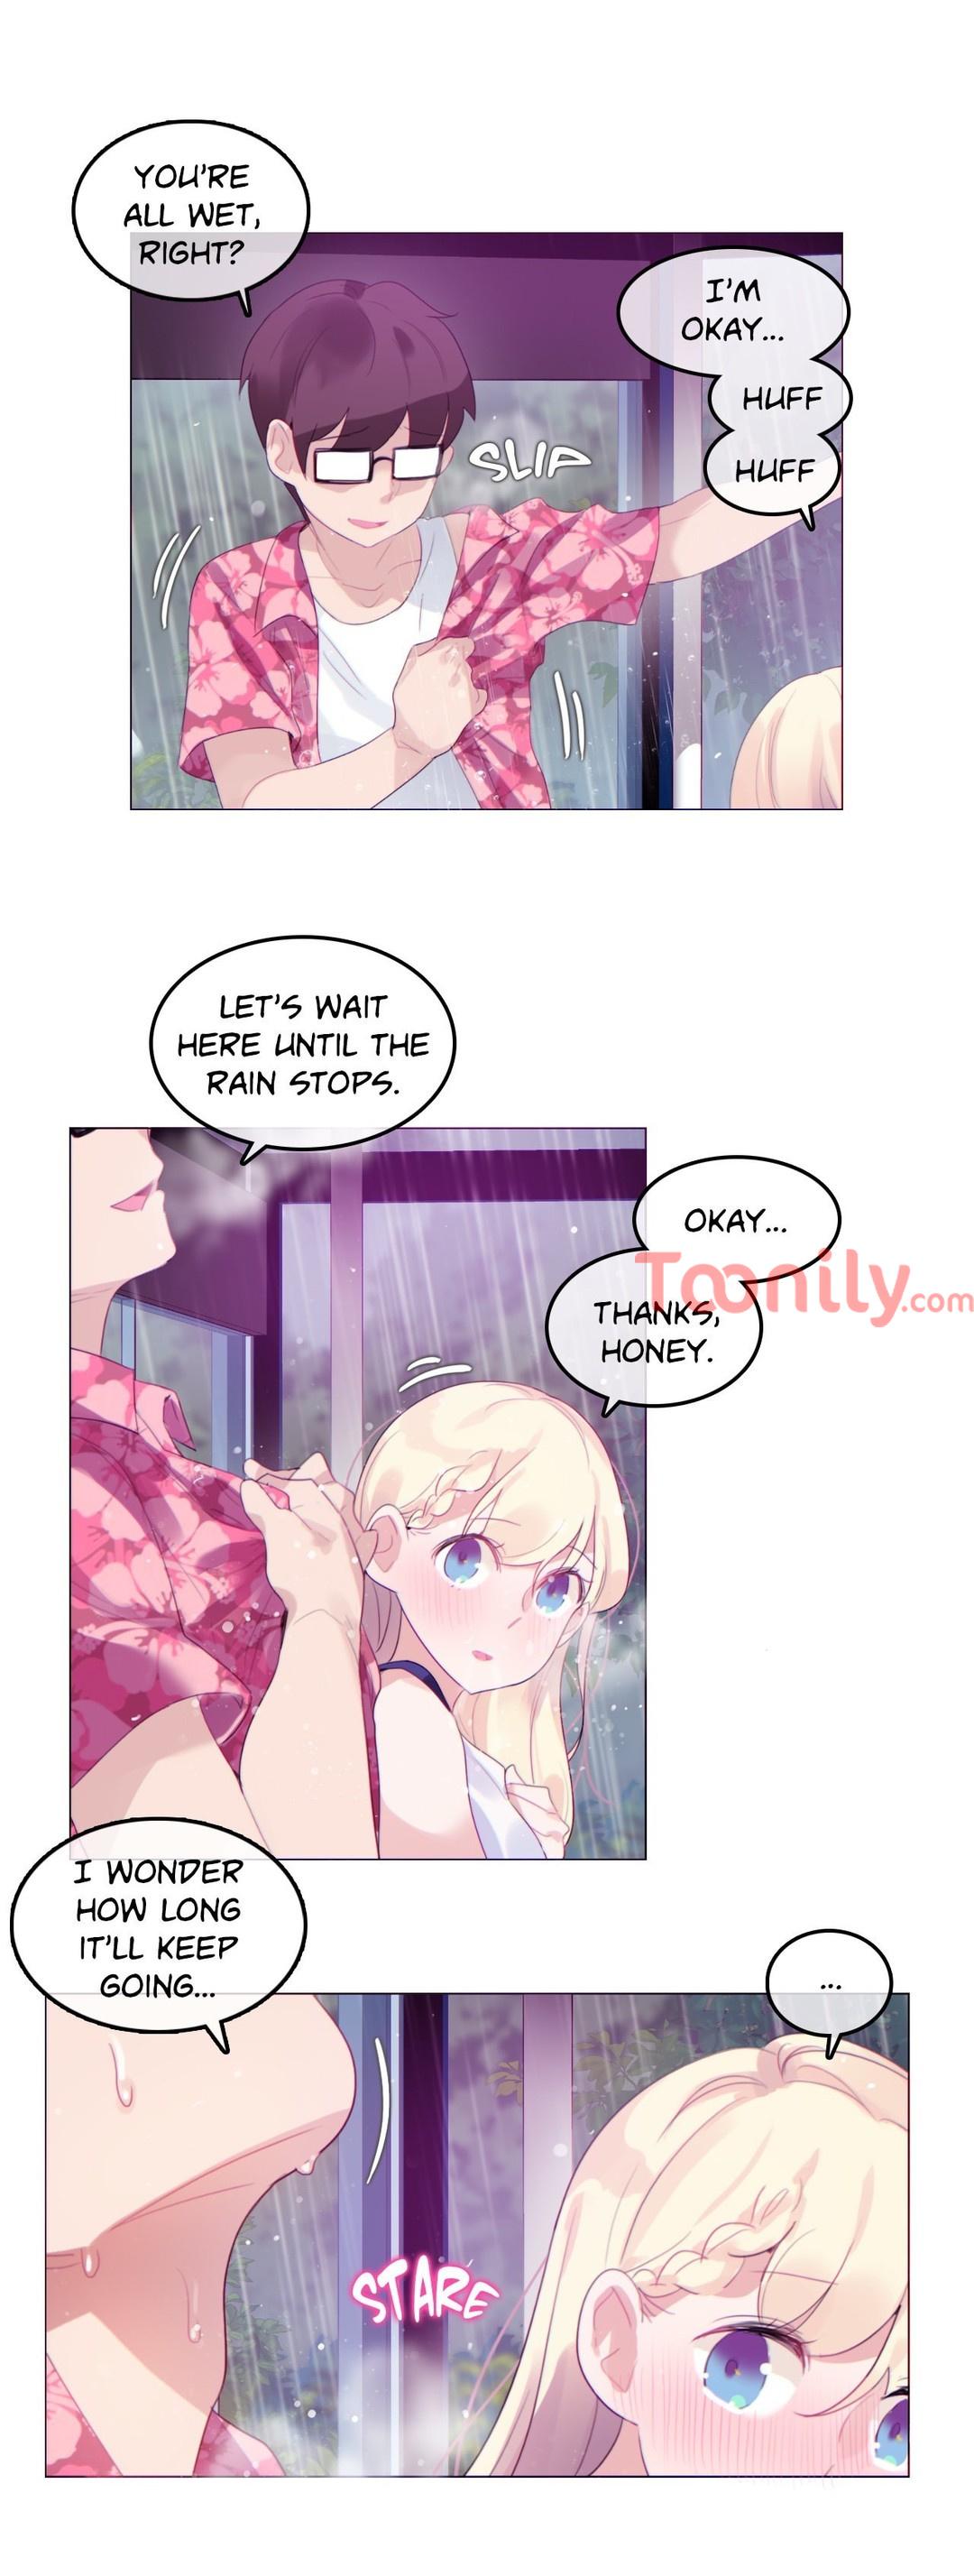 A Pervert's Daily Life • Chapter 66-70 13